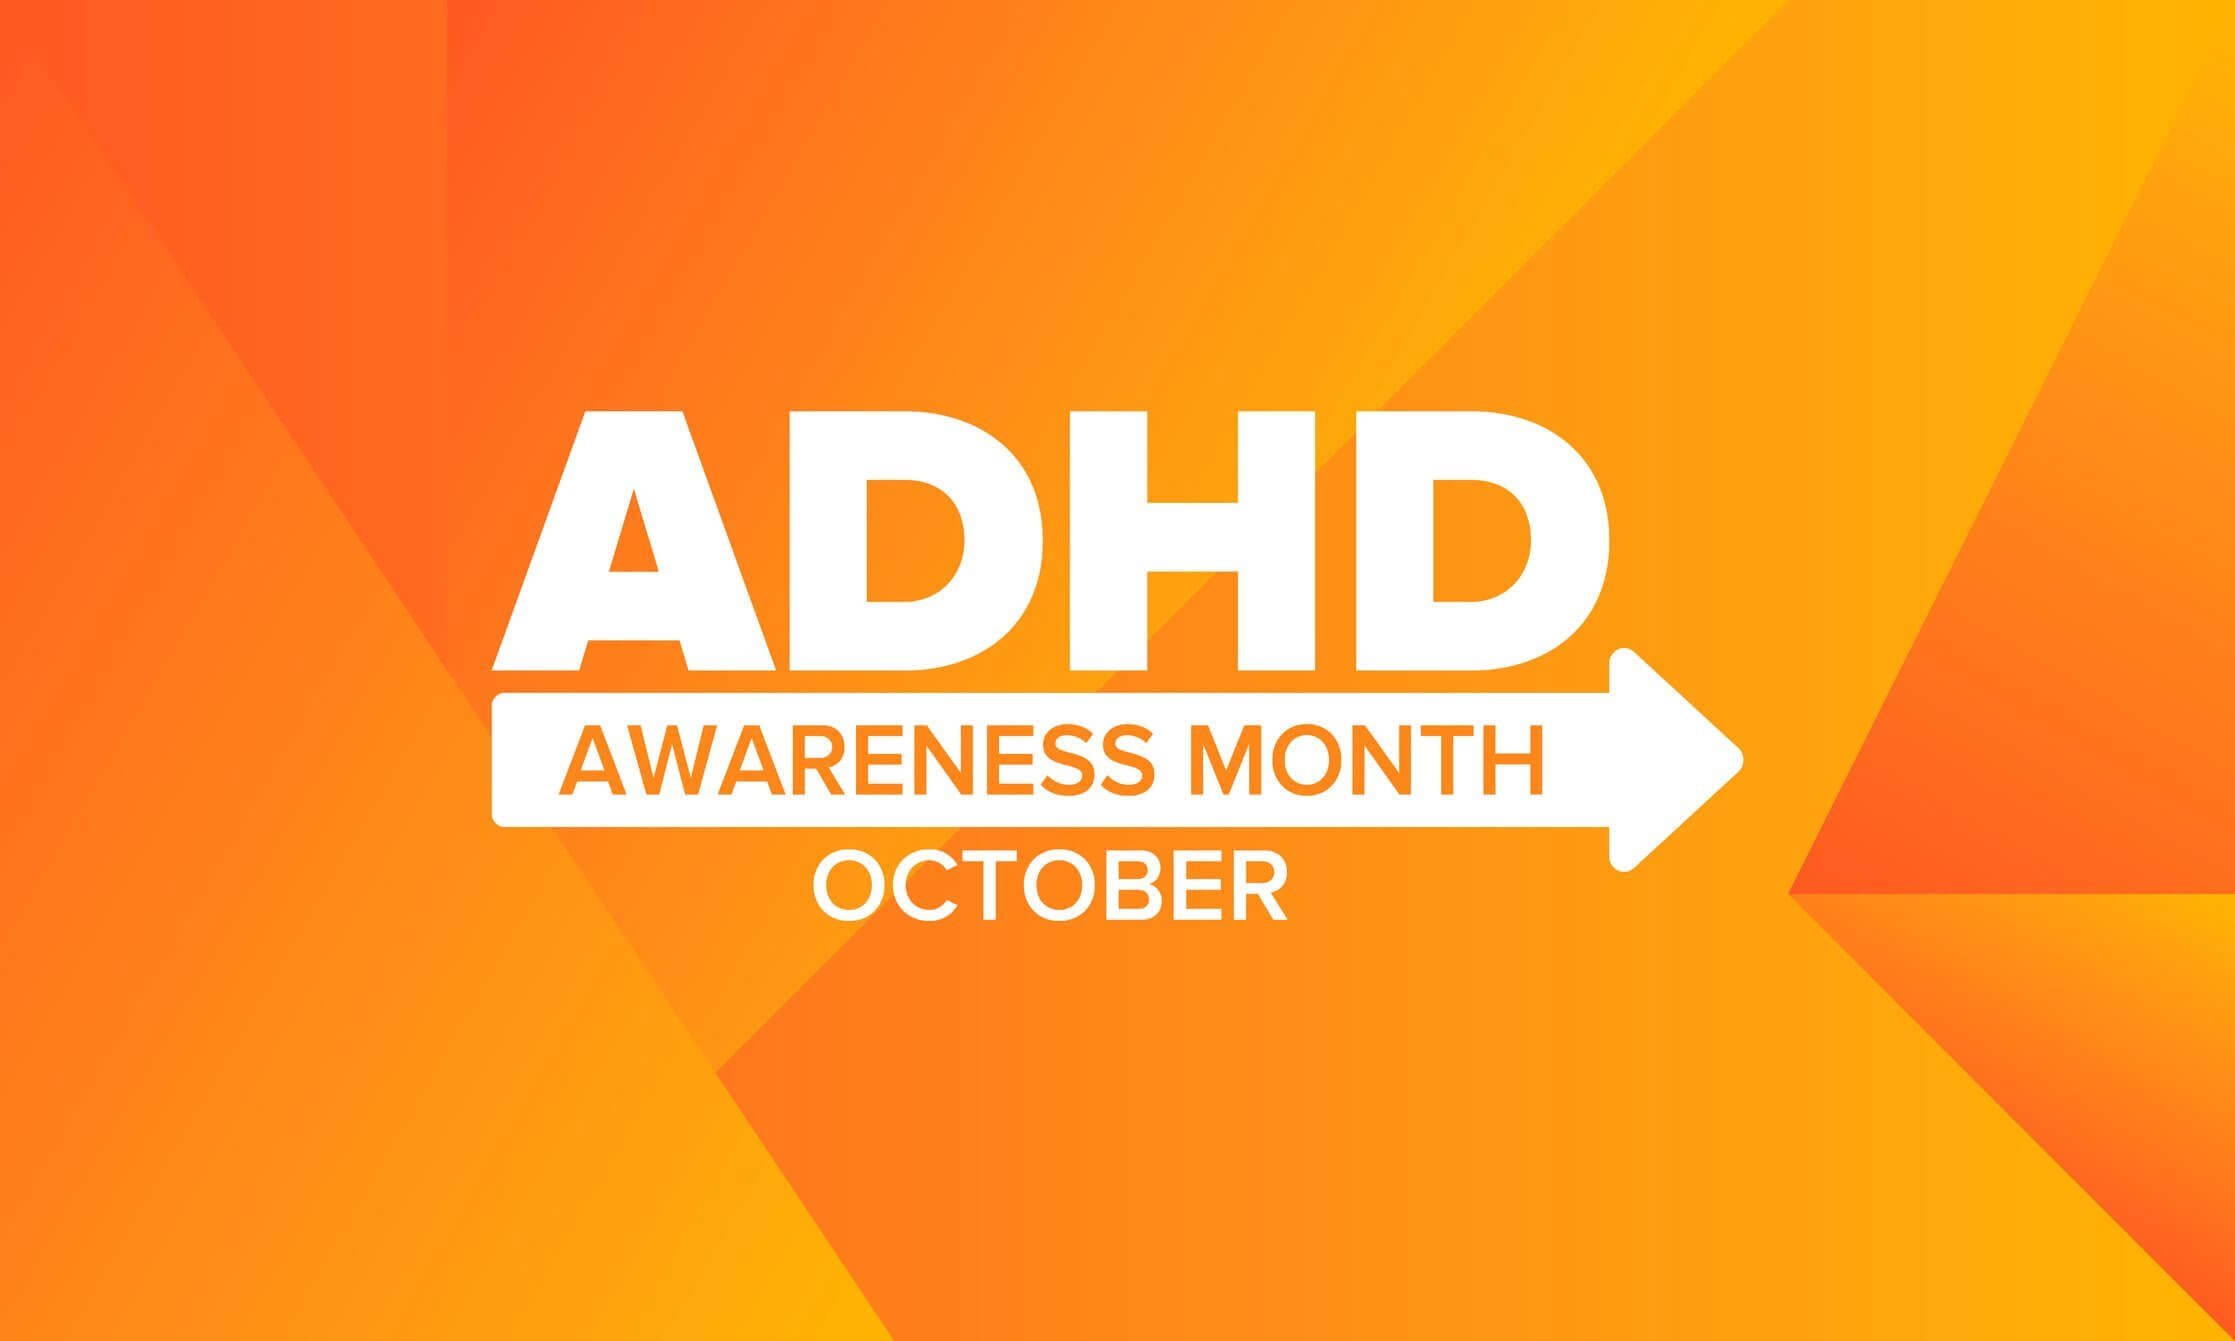 Featured image for “What and When is ADHD Awareness Month?”